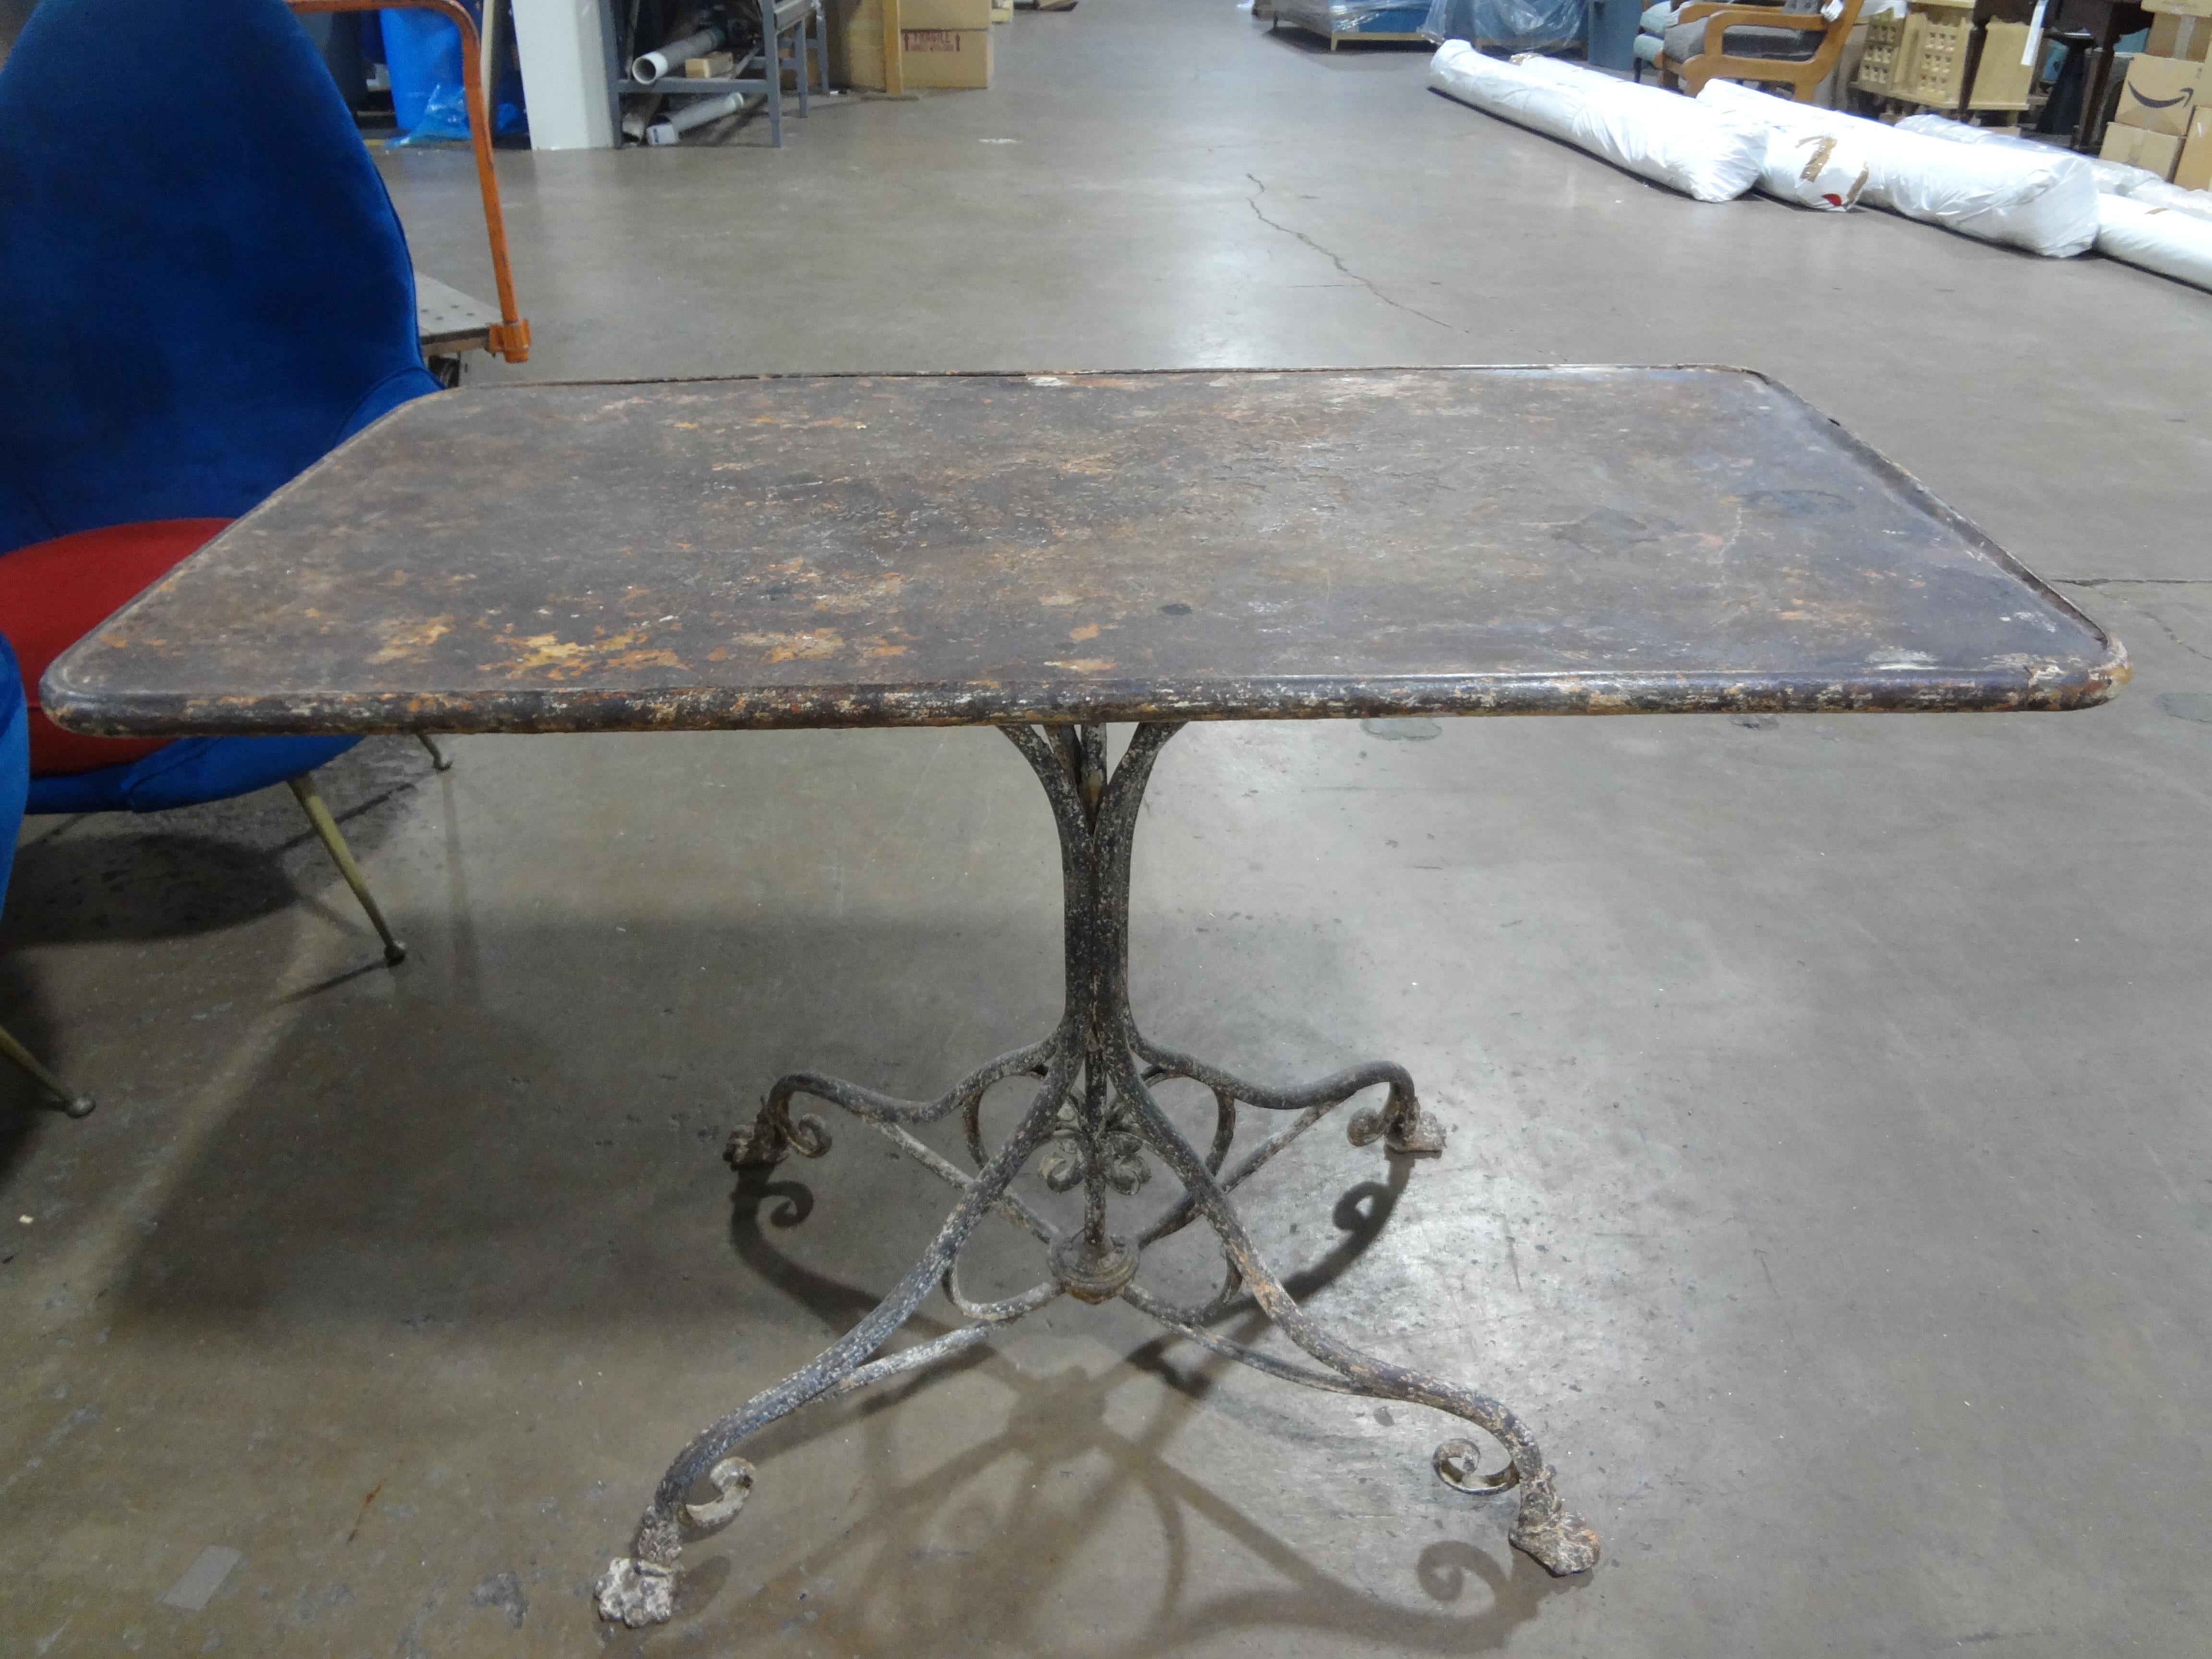 19th Century French Iron Garden Table By Arras.
Our lovely antique French iron table would be a great addition to your garden setting or used indoors.
Stunning!
